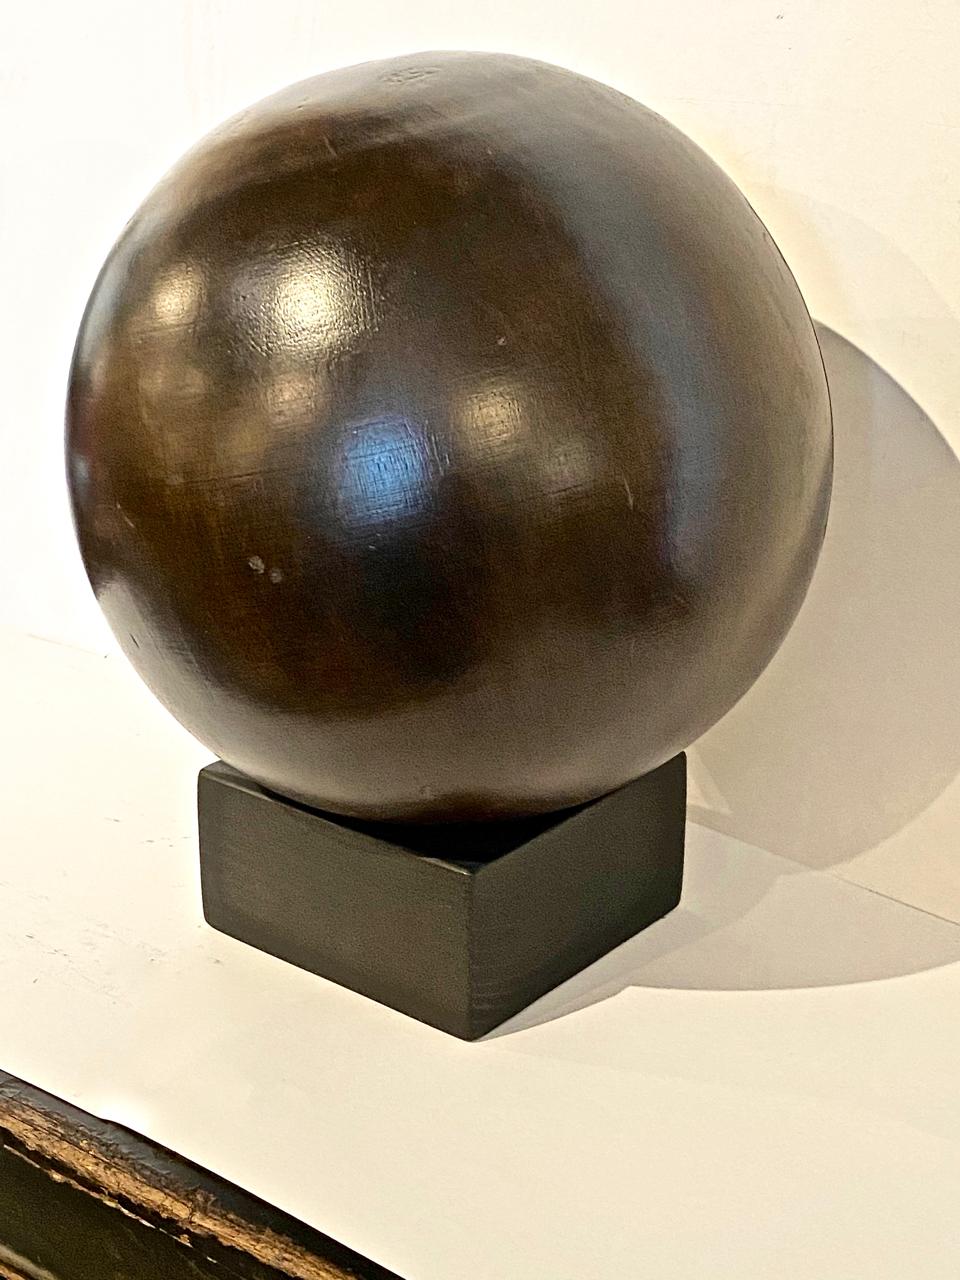 This is an example of an early 20th century Lignum Vitae bowling ball on stand. This ball was not drilled for finger grips, perhaps because of the split shown in the photos. The ball would make a great decorative element for a masculine study or